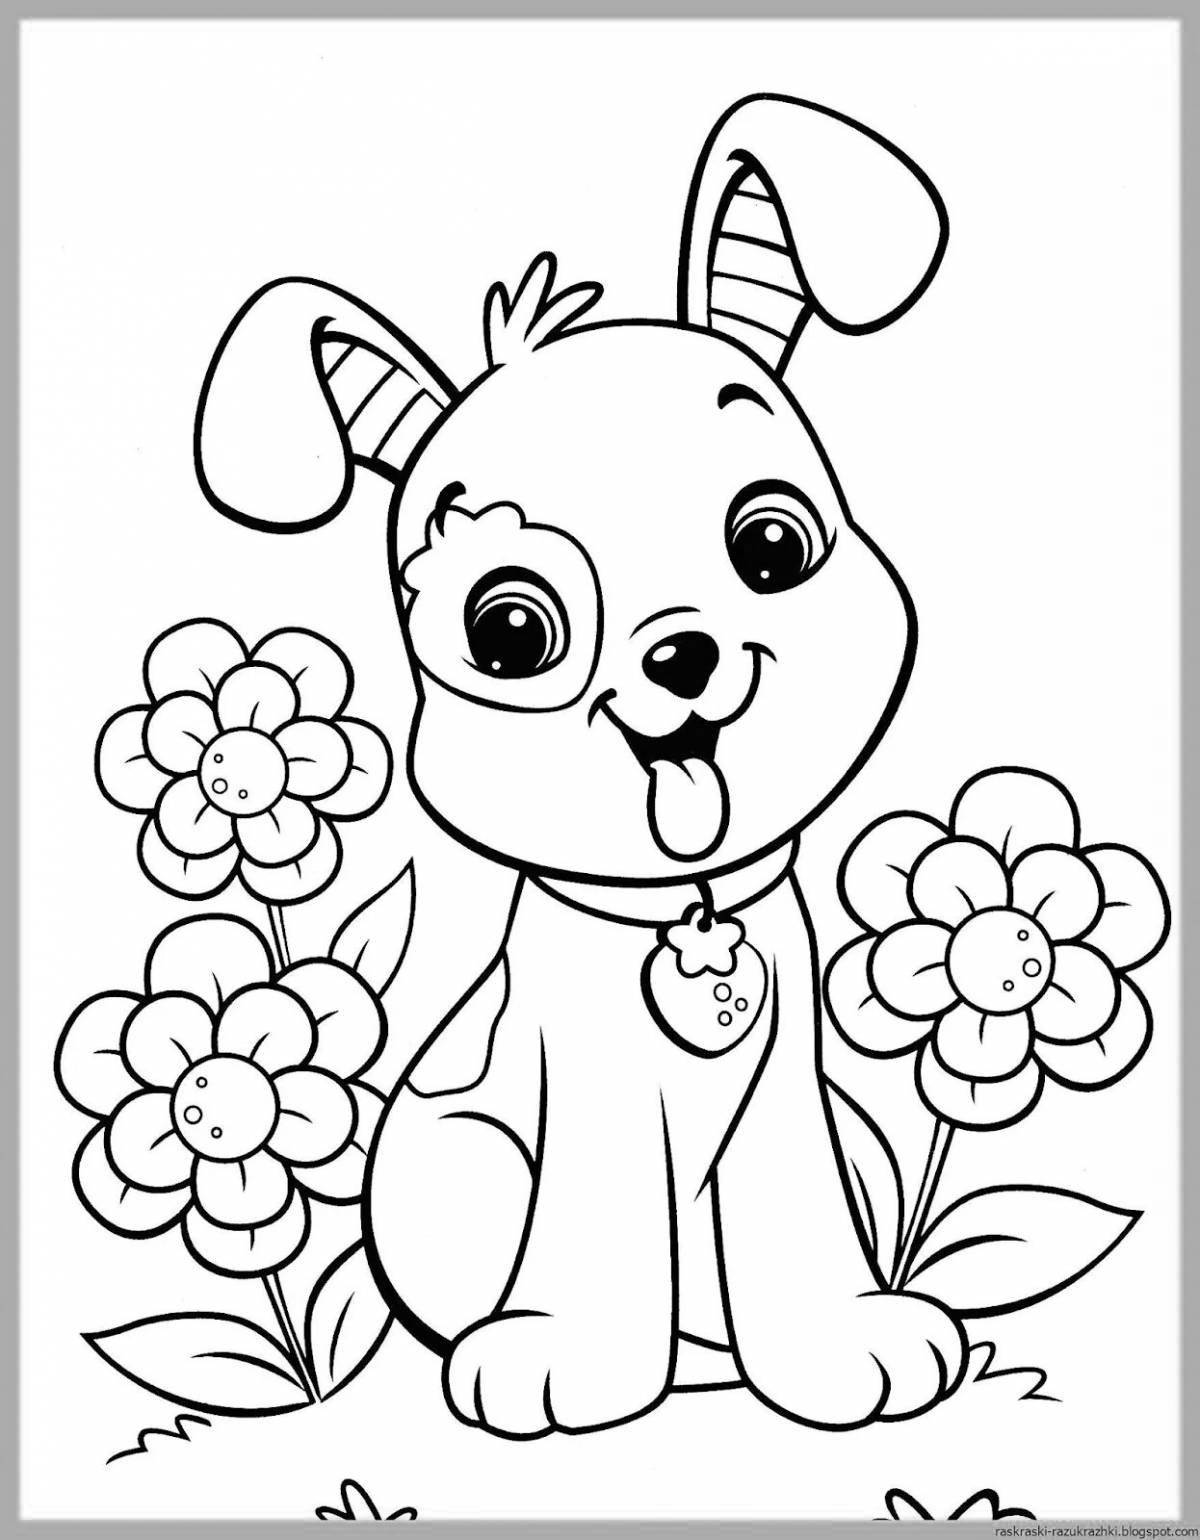 Fun coloring for girls 5 years old animals